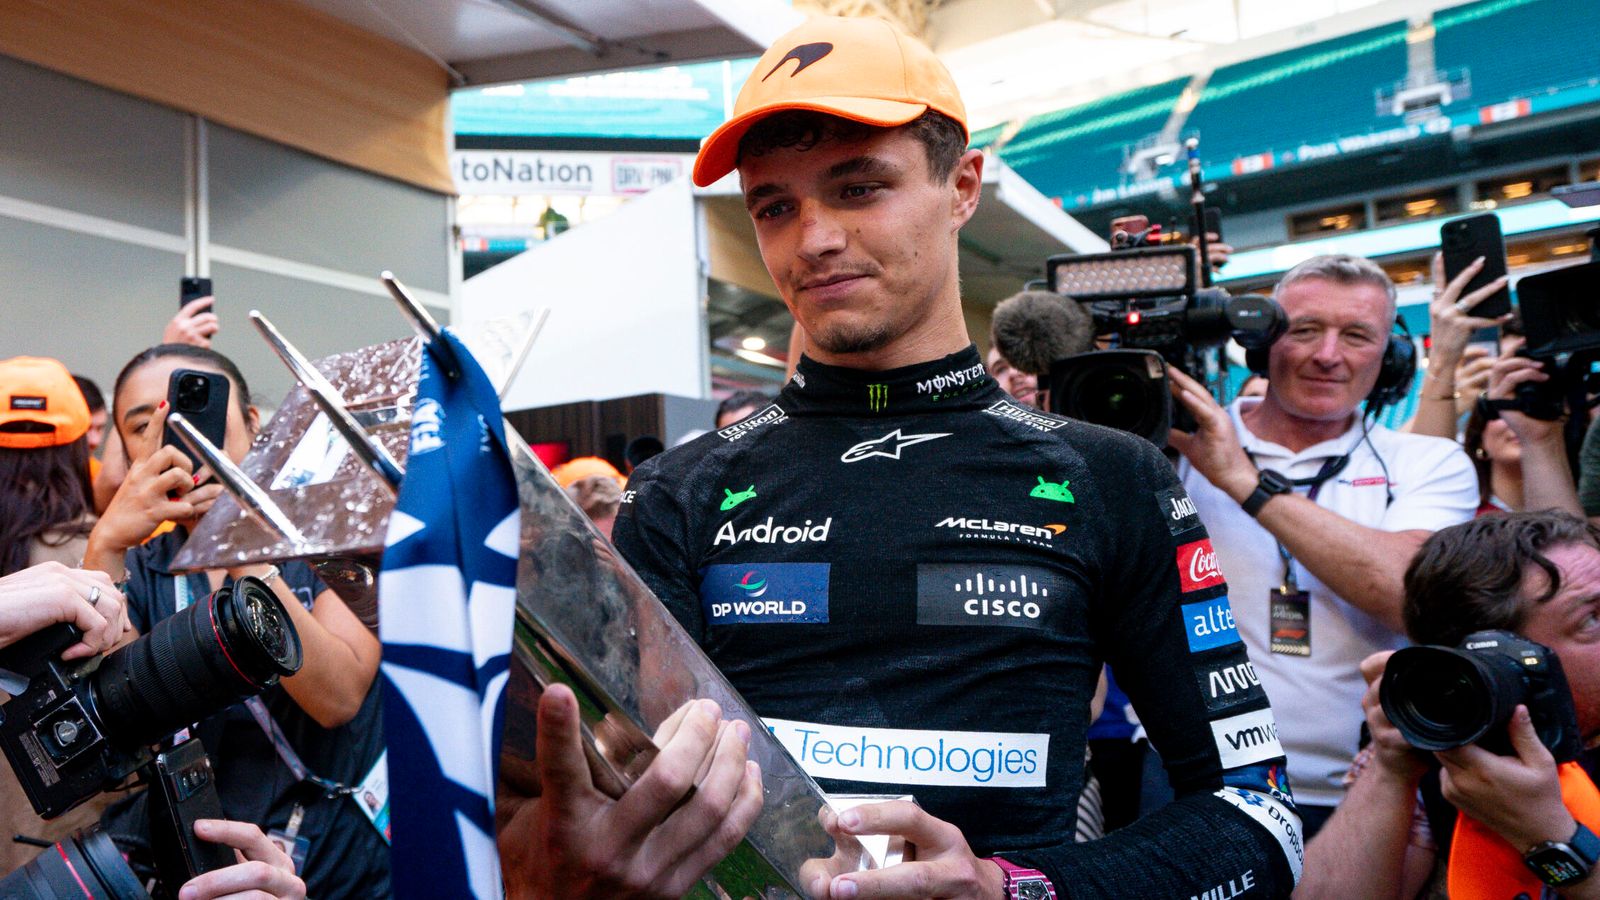 Lando Norris vows more to come from him and McLaren after proving doubters wrong in Miami Grand Prix win | F1 News